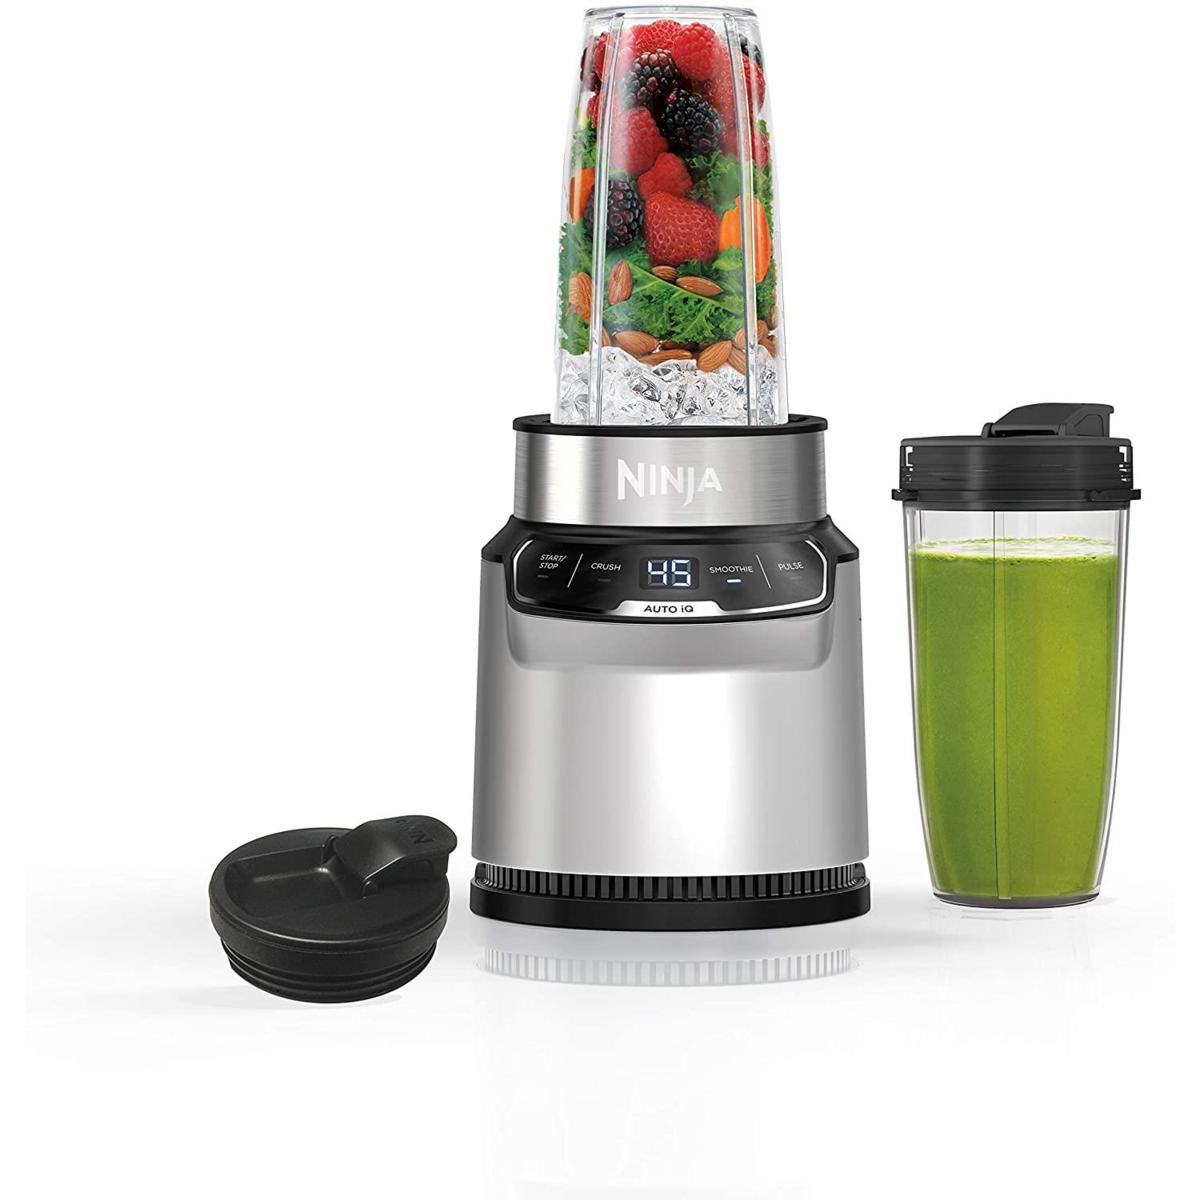 Ninja Nutri Pro with Auto-IQ Personal Blender 1100W, $39.99 (with new user code) at HSN